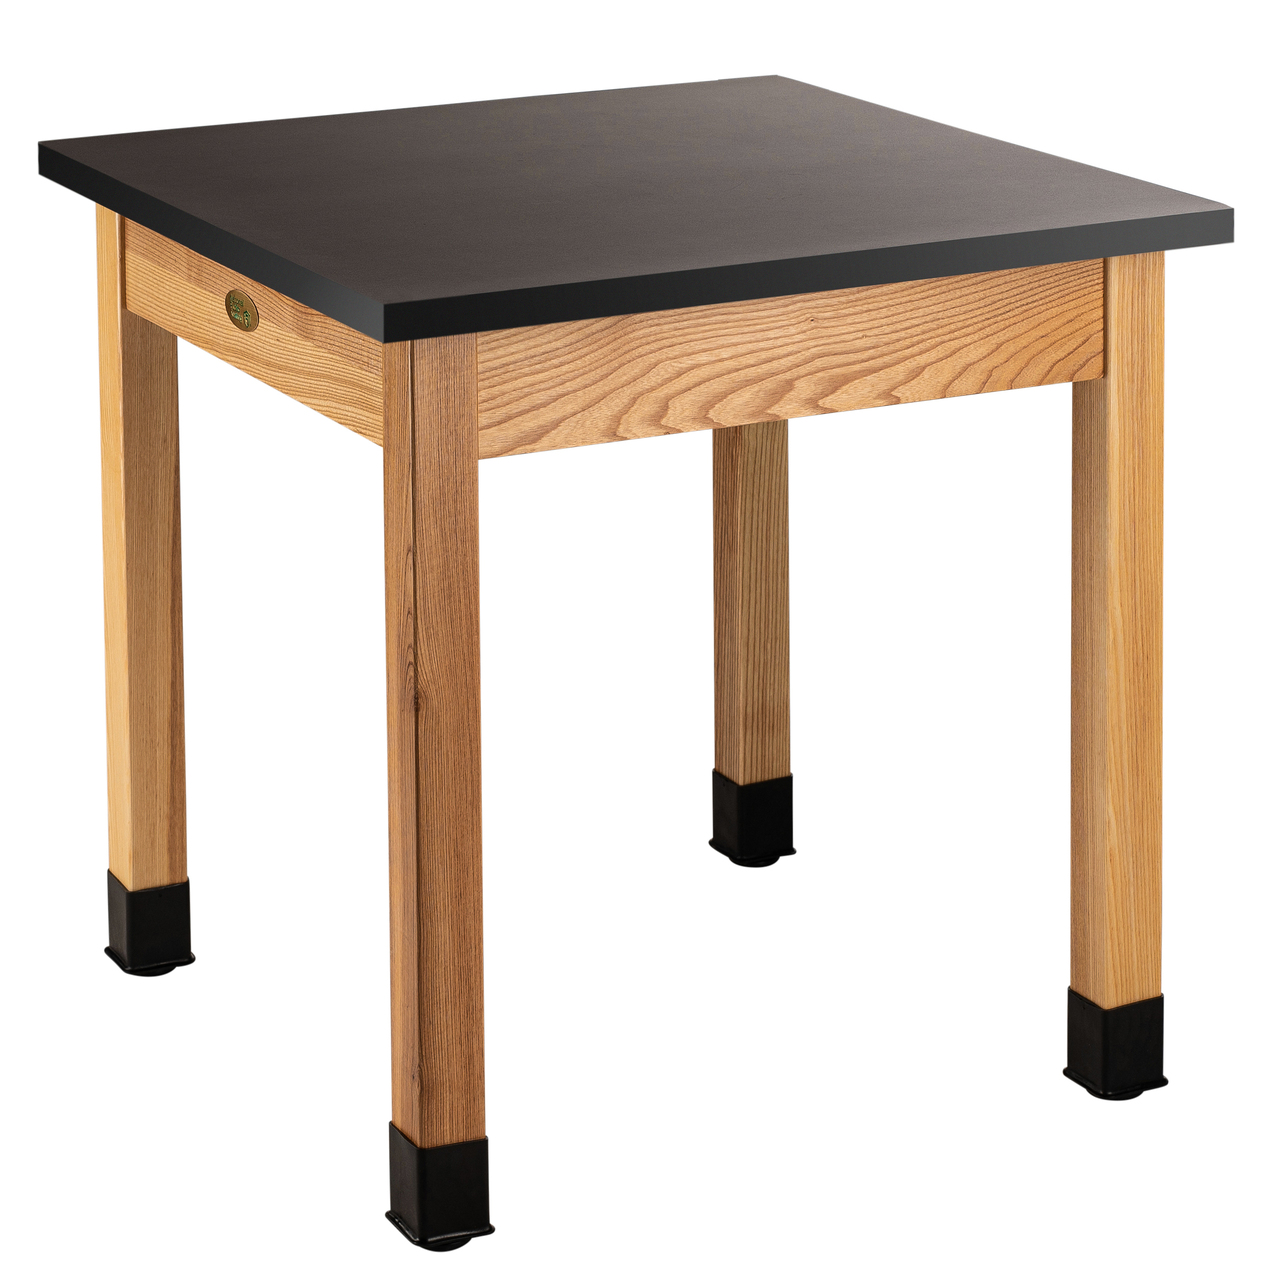 NPS Wood Science Lab Table -  30"x30"x36" -  Chemical Resistant Top - Black Top and Ash Leg